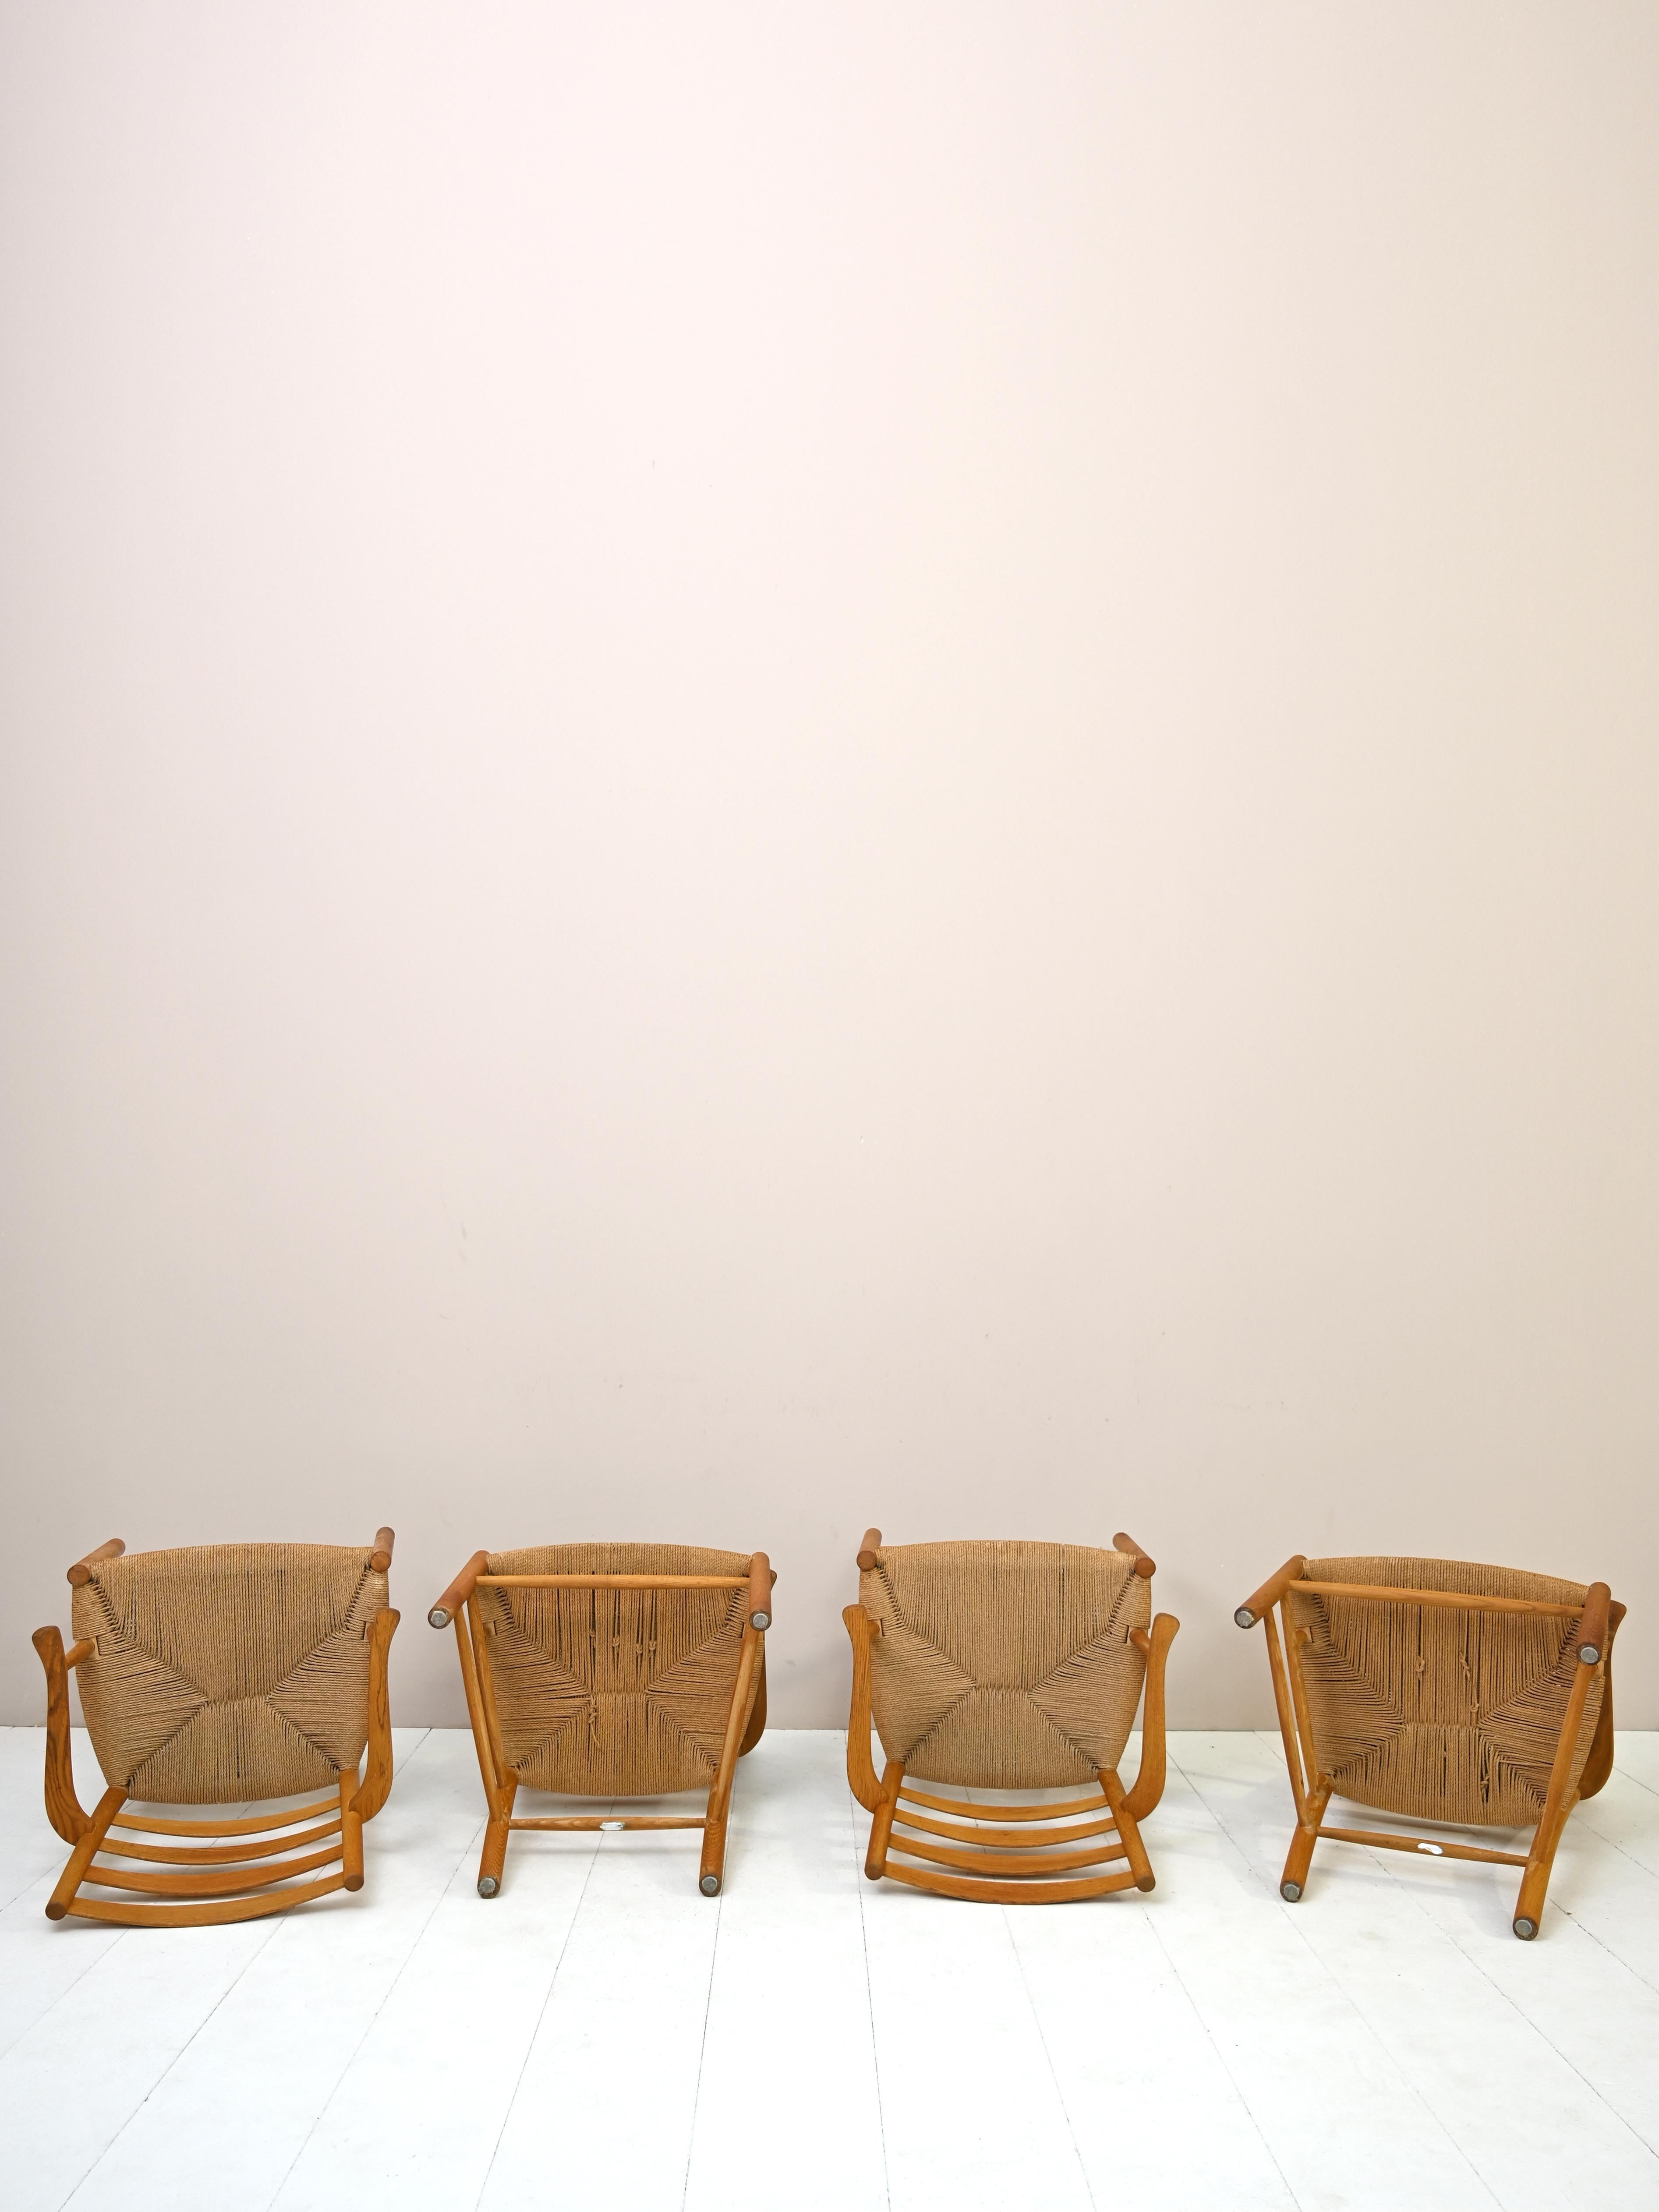 Set of 4 Danish vintage Fritz Hansen design chairs with authentic stamp.
This model, which has become iconic, was designed by Kaare Klint and made by Fritz Hansen in
1936.
Made of beech wood and rope, they embody the understated and elegant style